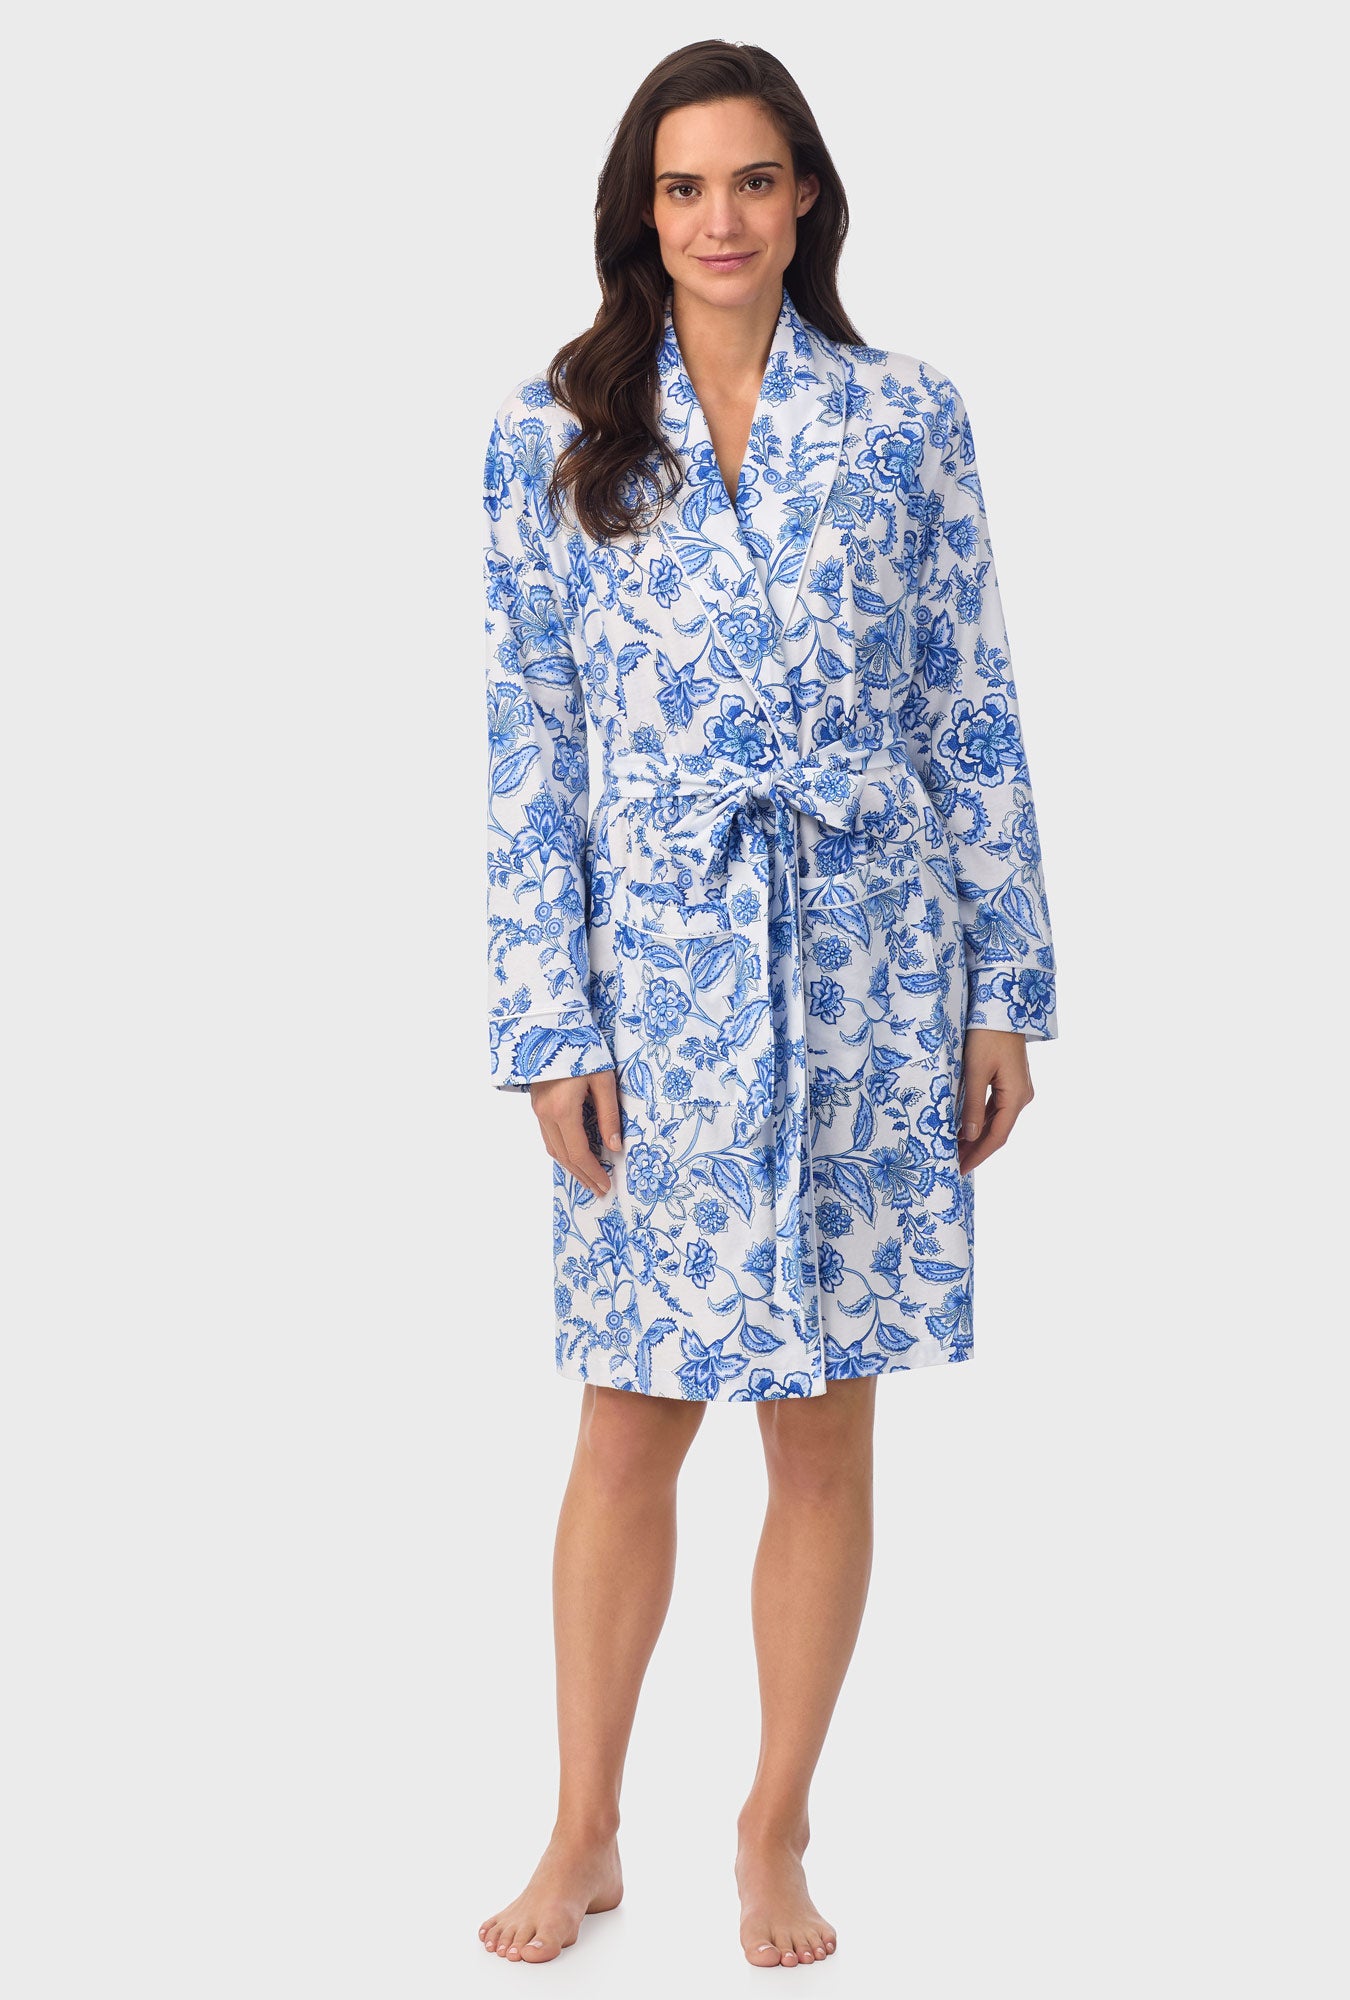 A lady wearing blue long Sleeve Floral Vine Wrap Robe with Colbalt Blue print